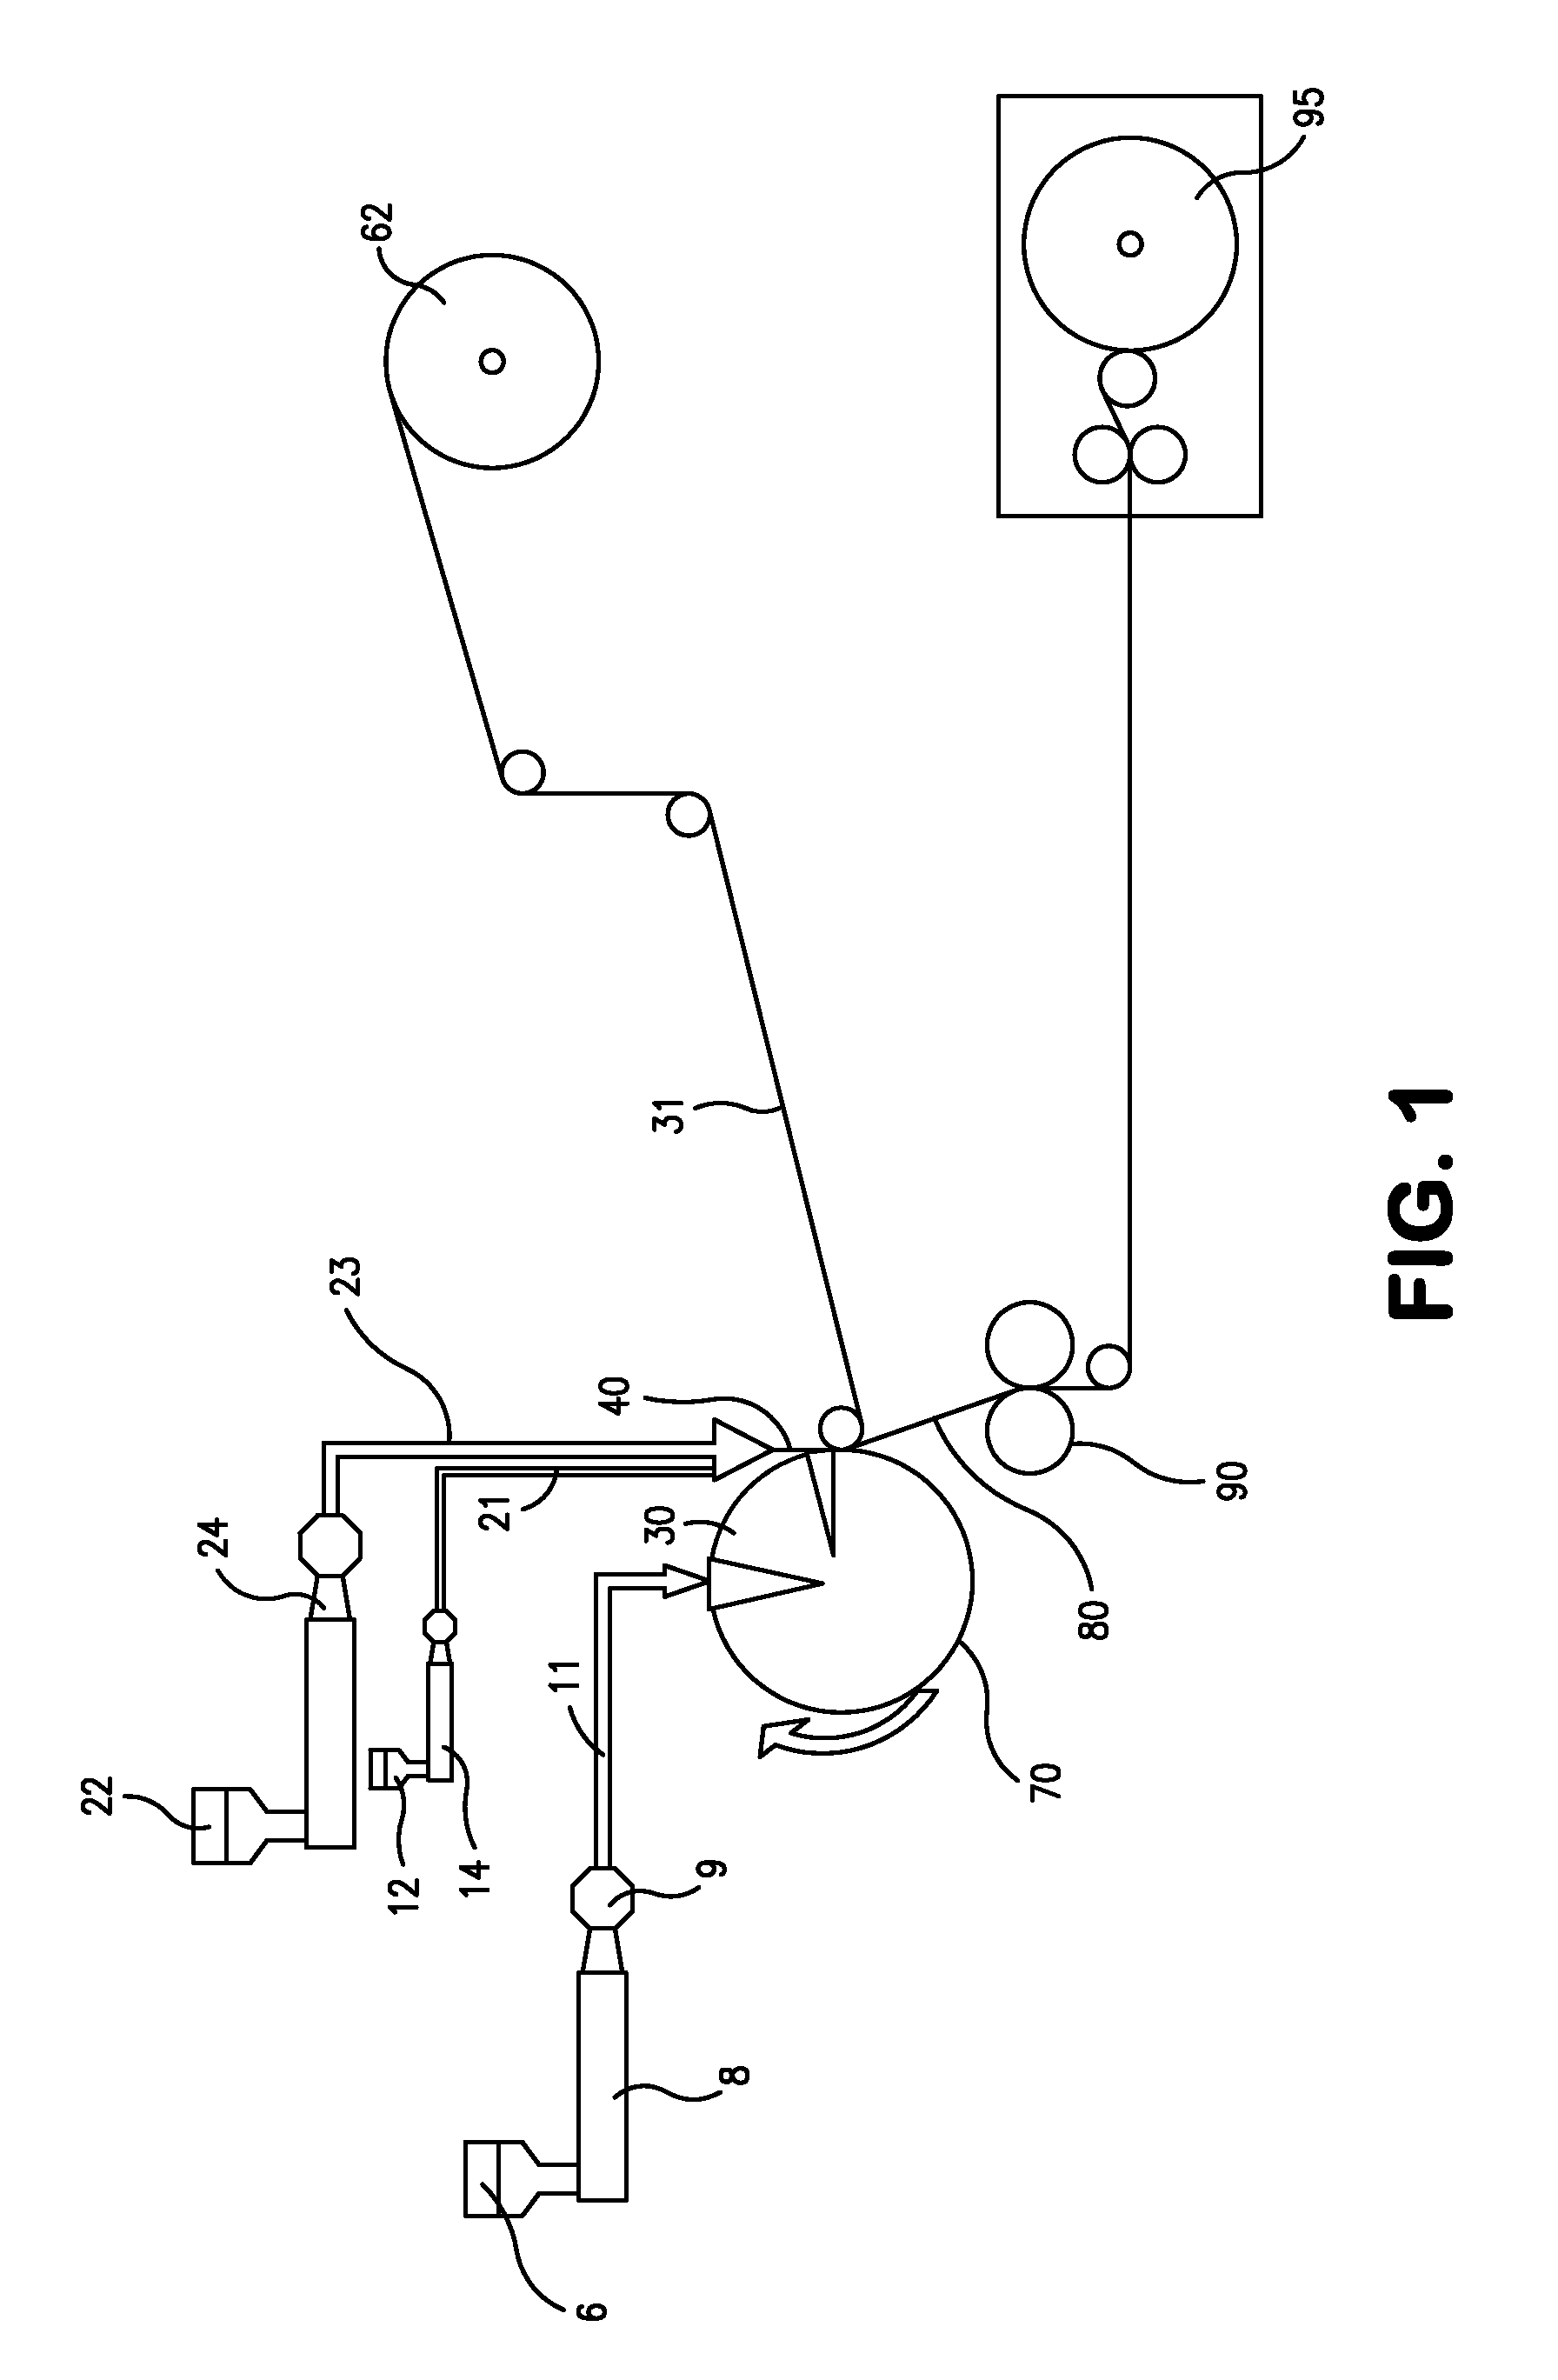 Elastic Composite Containing a Low Strength and Lightweight Nonwoven Facing